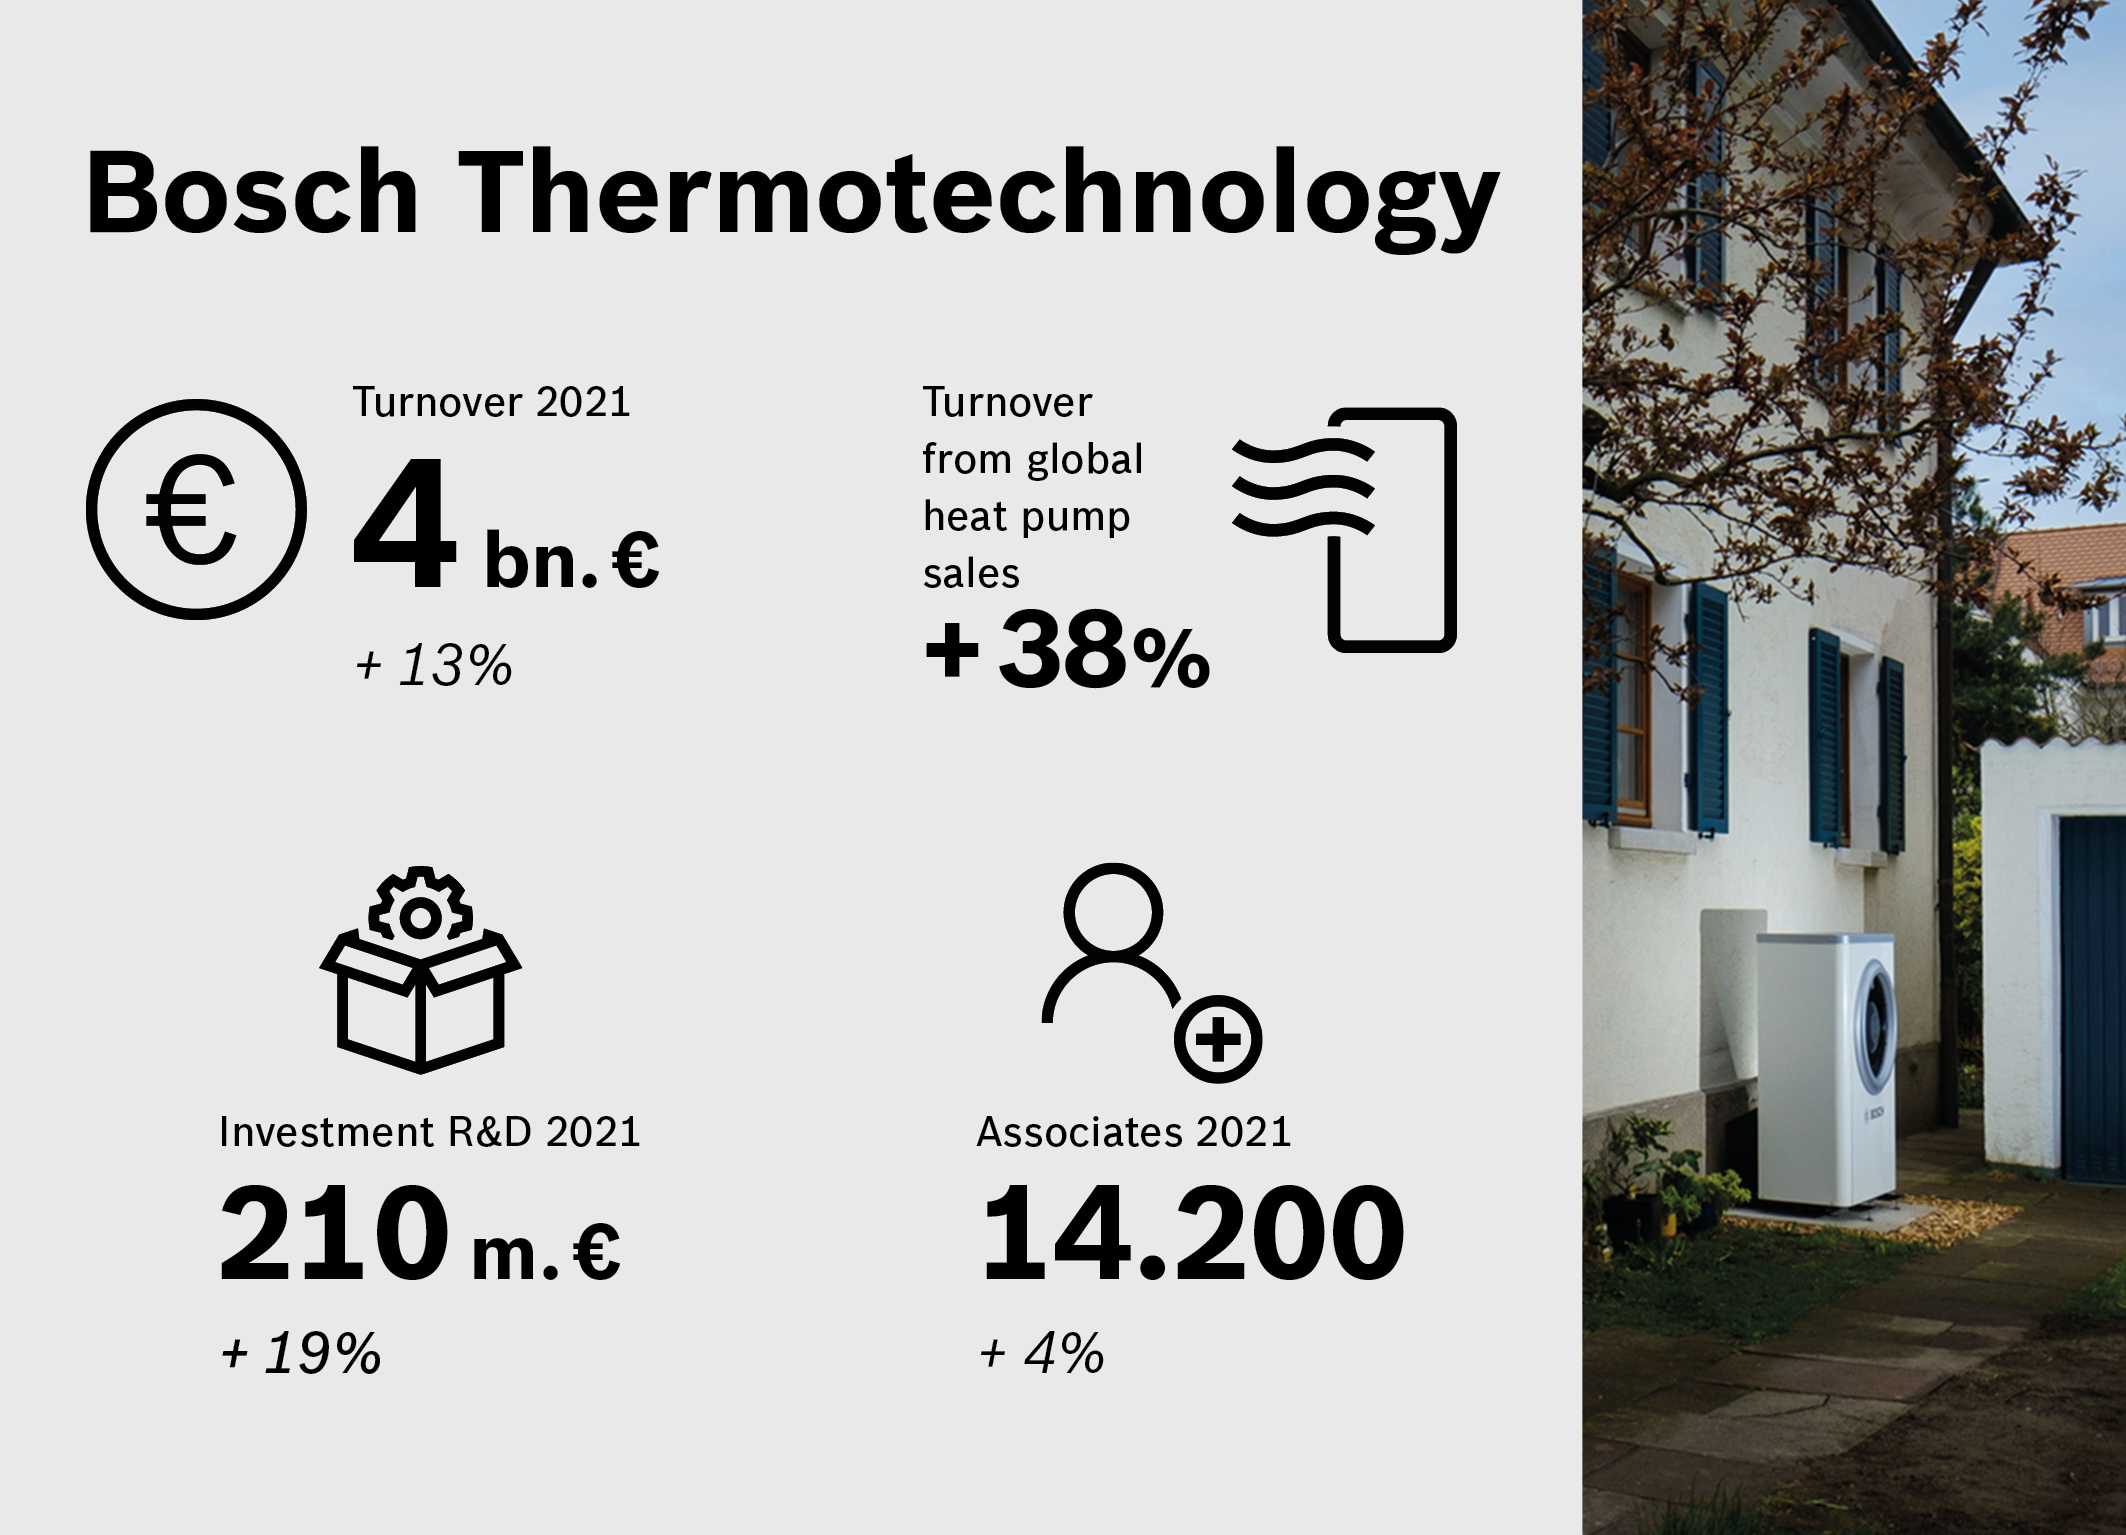 Bosch Thermotechnology achieved sales of four billion euros in 2021